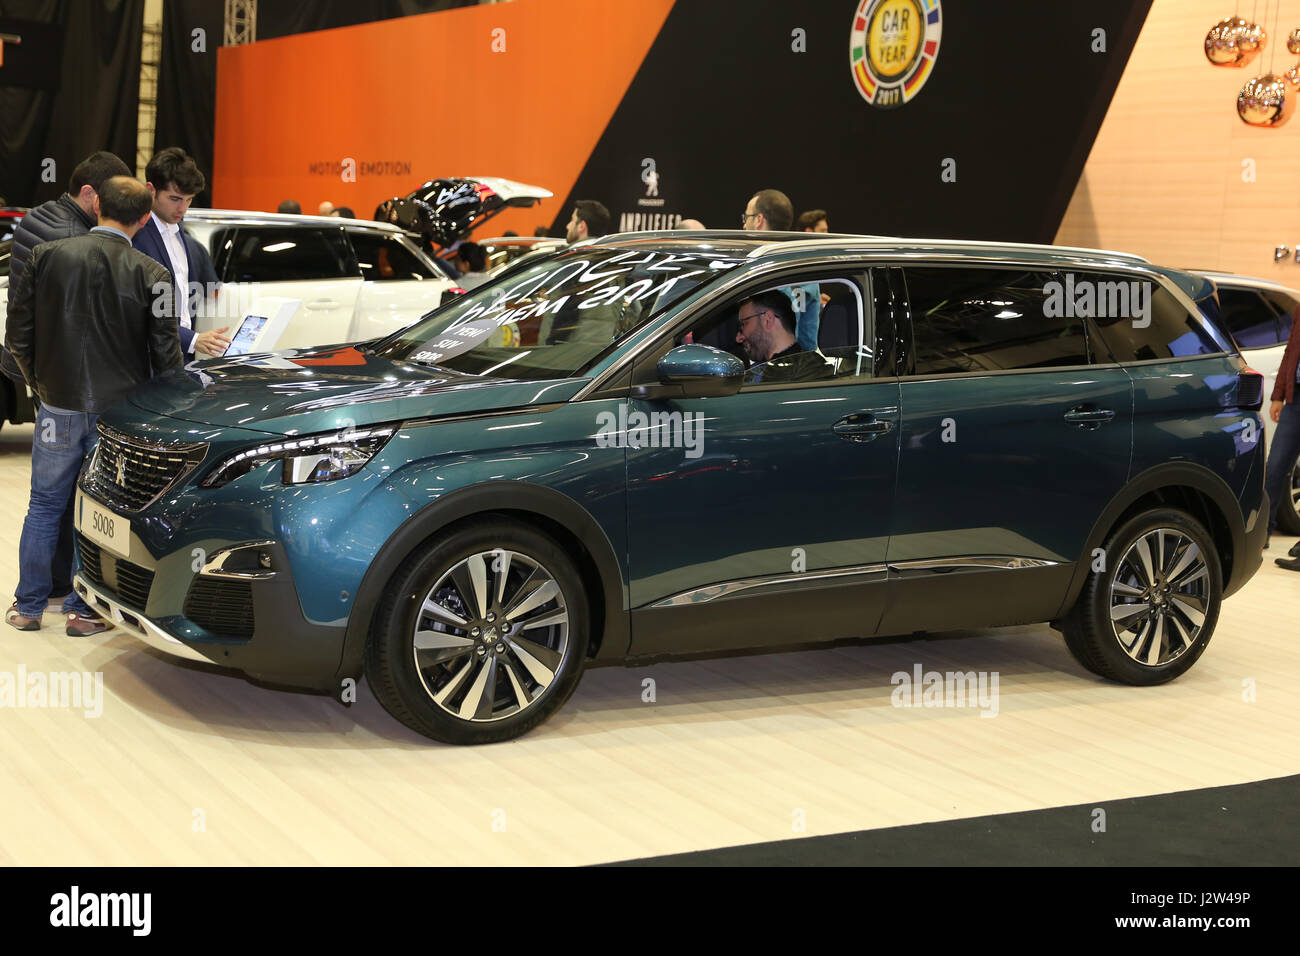 ISTANBUL, TURKEY - APRIL 22, 2017: Peugeot 5008 on display at Autoshow Istanbul Stock Photo